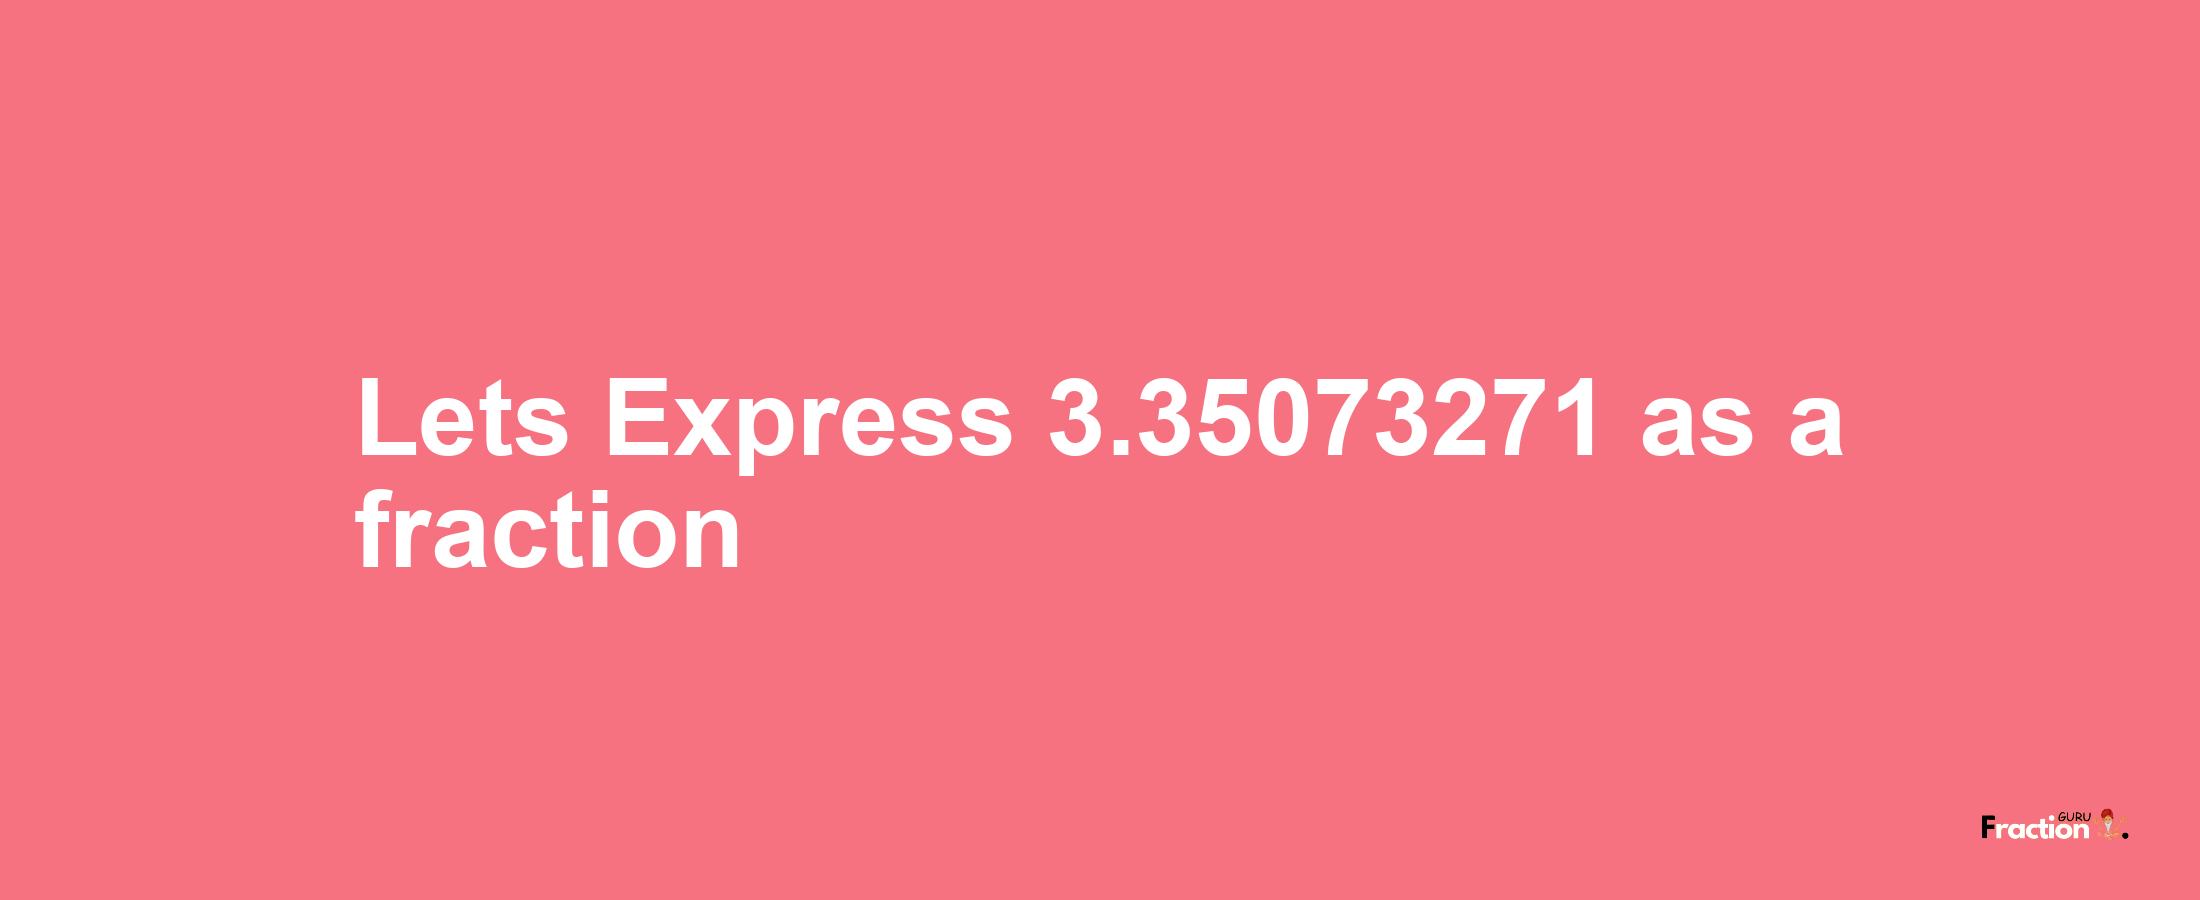 Lets Express 3.35073271 as afraction